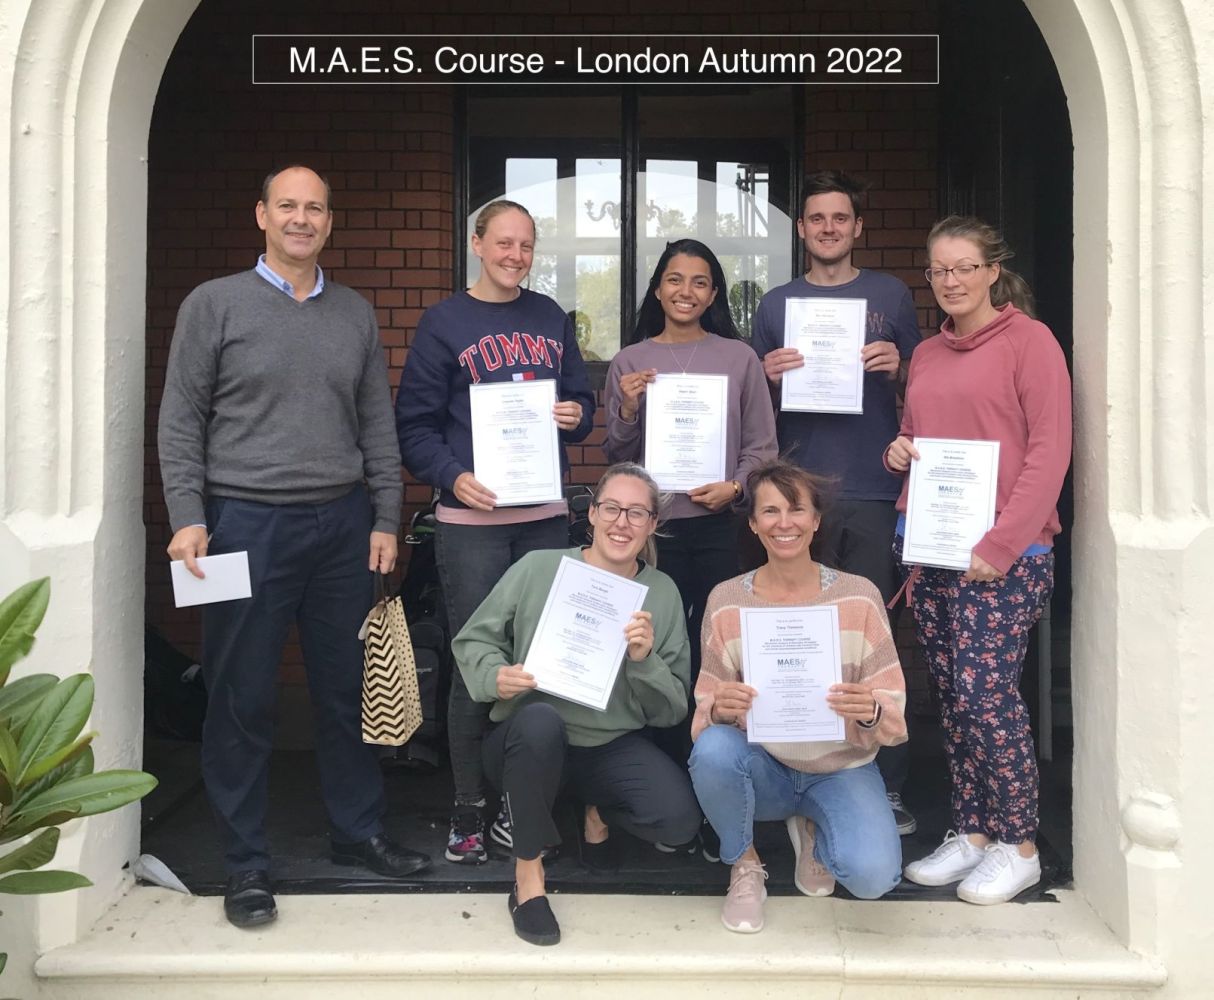 M.A.E.S. Course, London Autumn 2022 for Paediatric Therapists treating children with CP